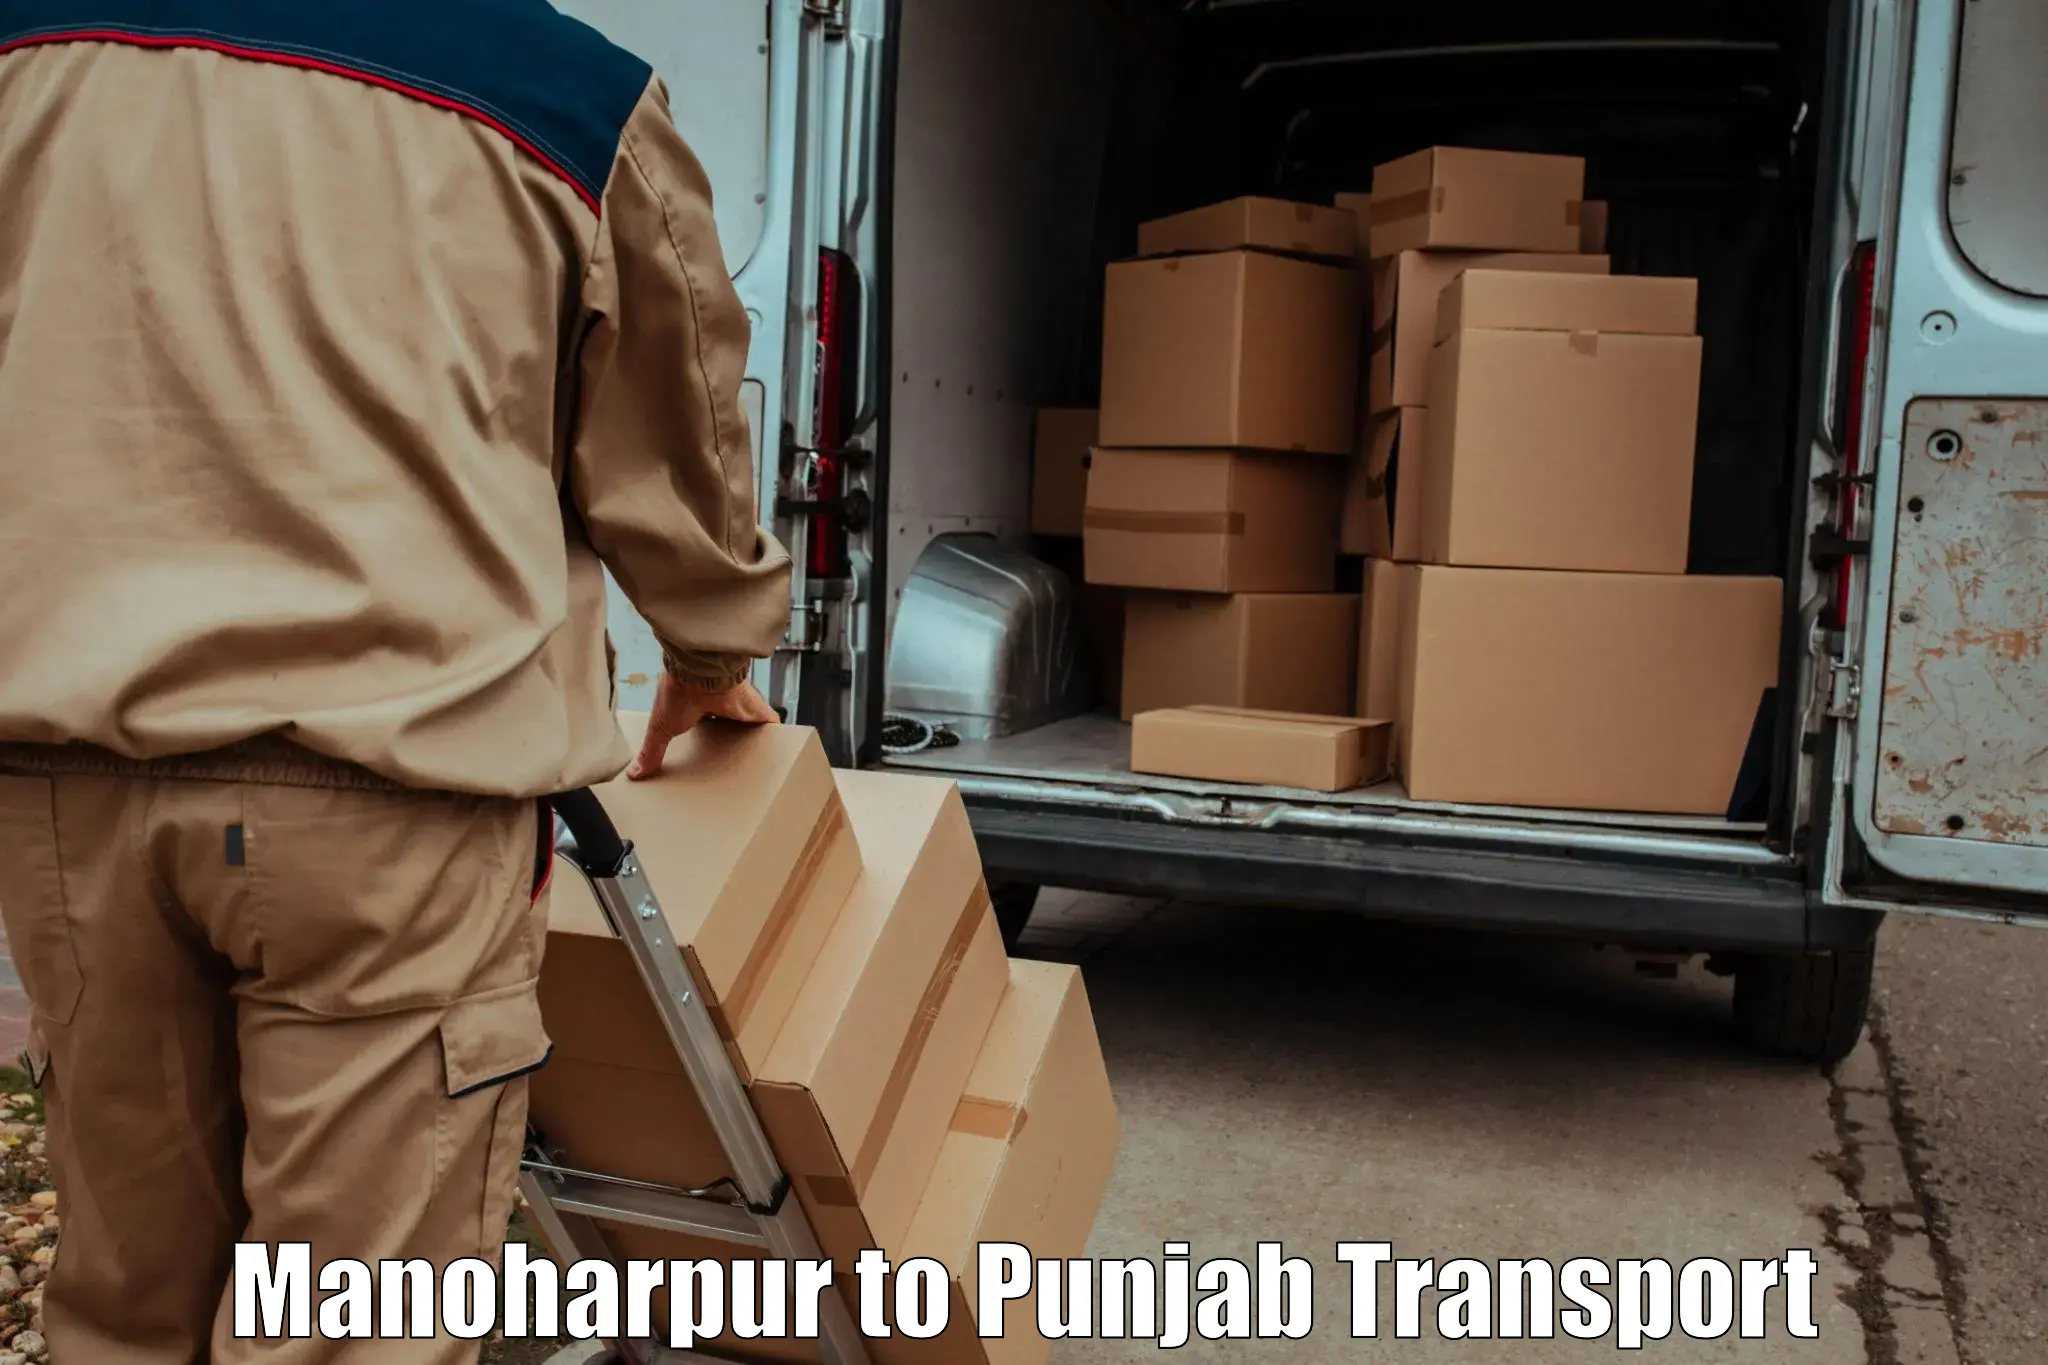 Transport bike from one state to another Manoharpur to Anandpur Sahib